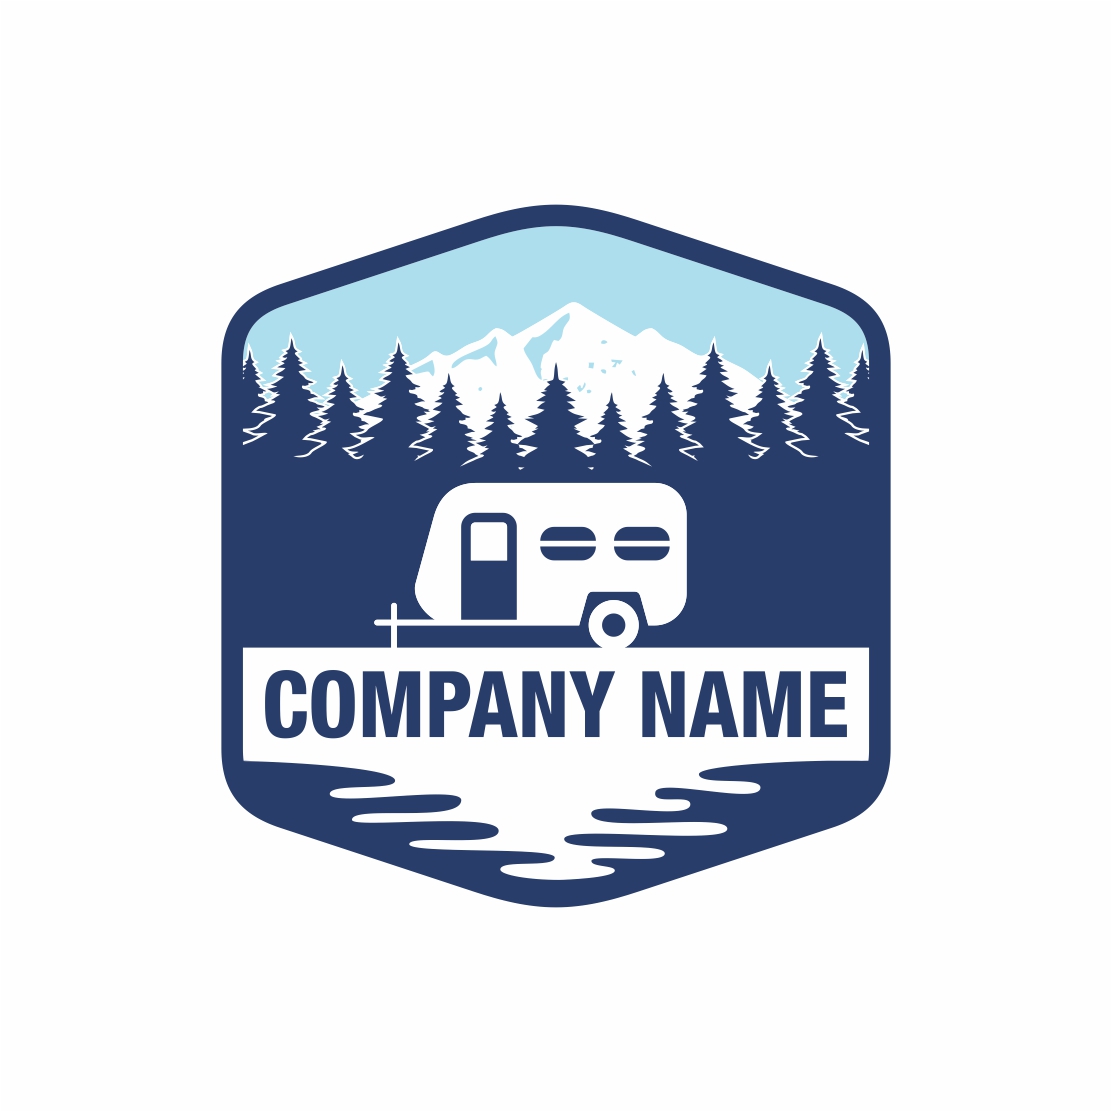 Camper Van Or Recreational Vehicle (RV) Adventure Car Logo Template, Travel And Leisure Vector Design – Only 8$ cover image.